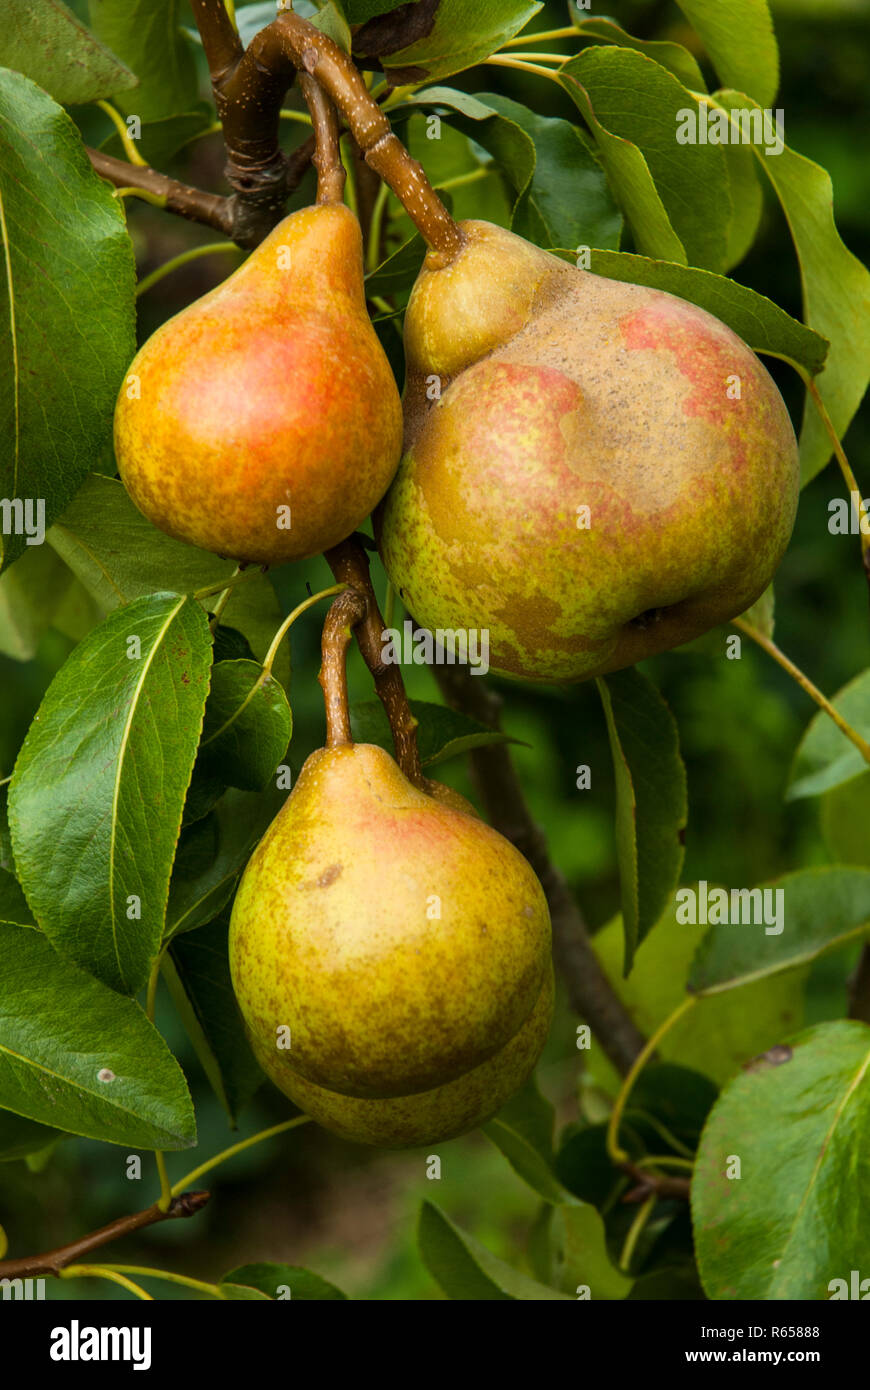 Ripe comice pears (doyenne du comice) growing naturally on a bough in the summer sun. Stock Photo